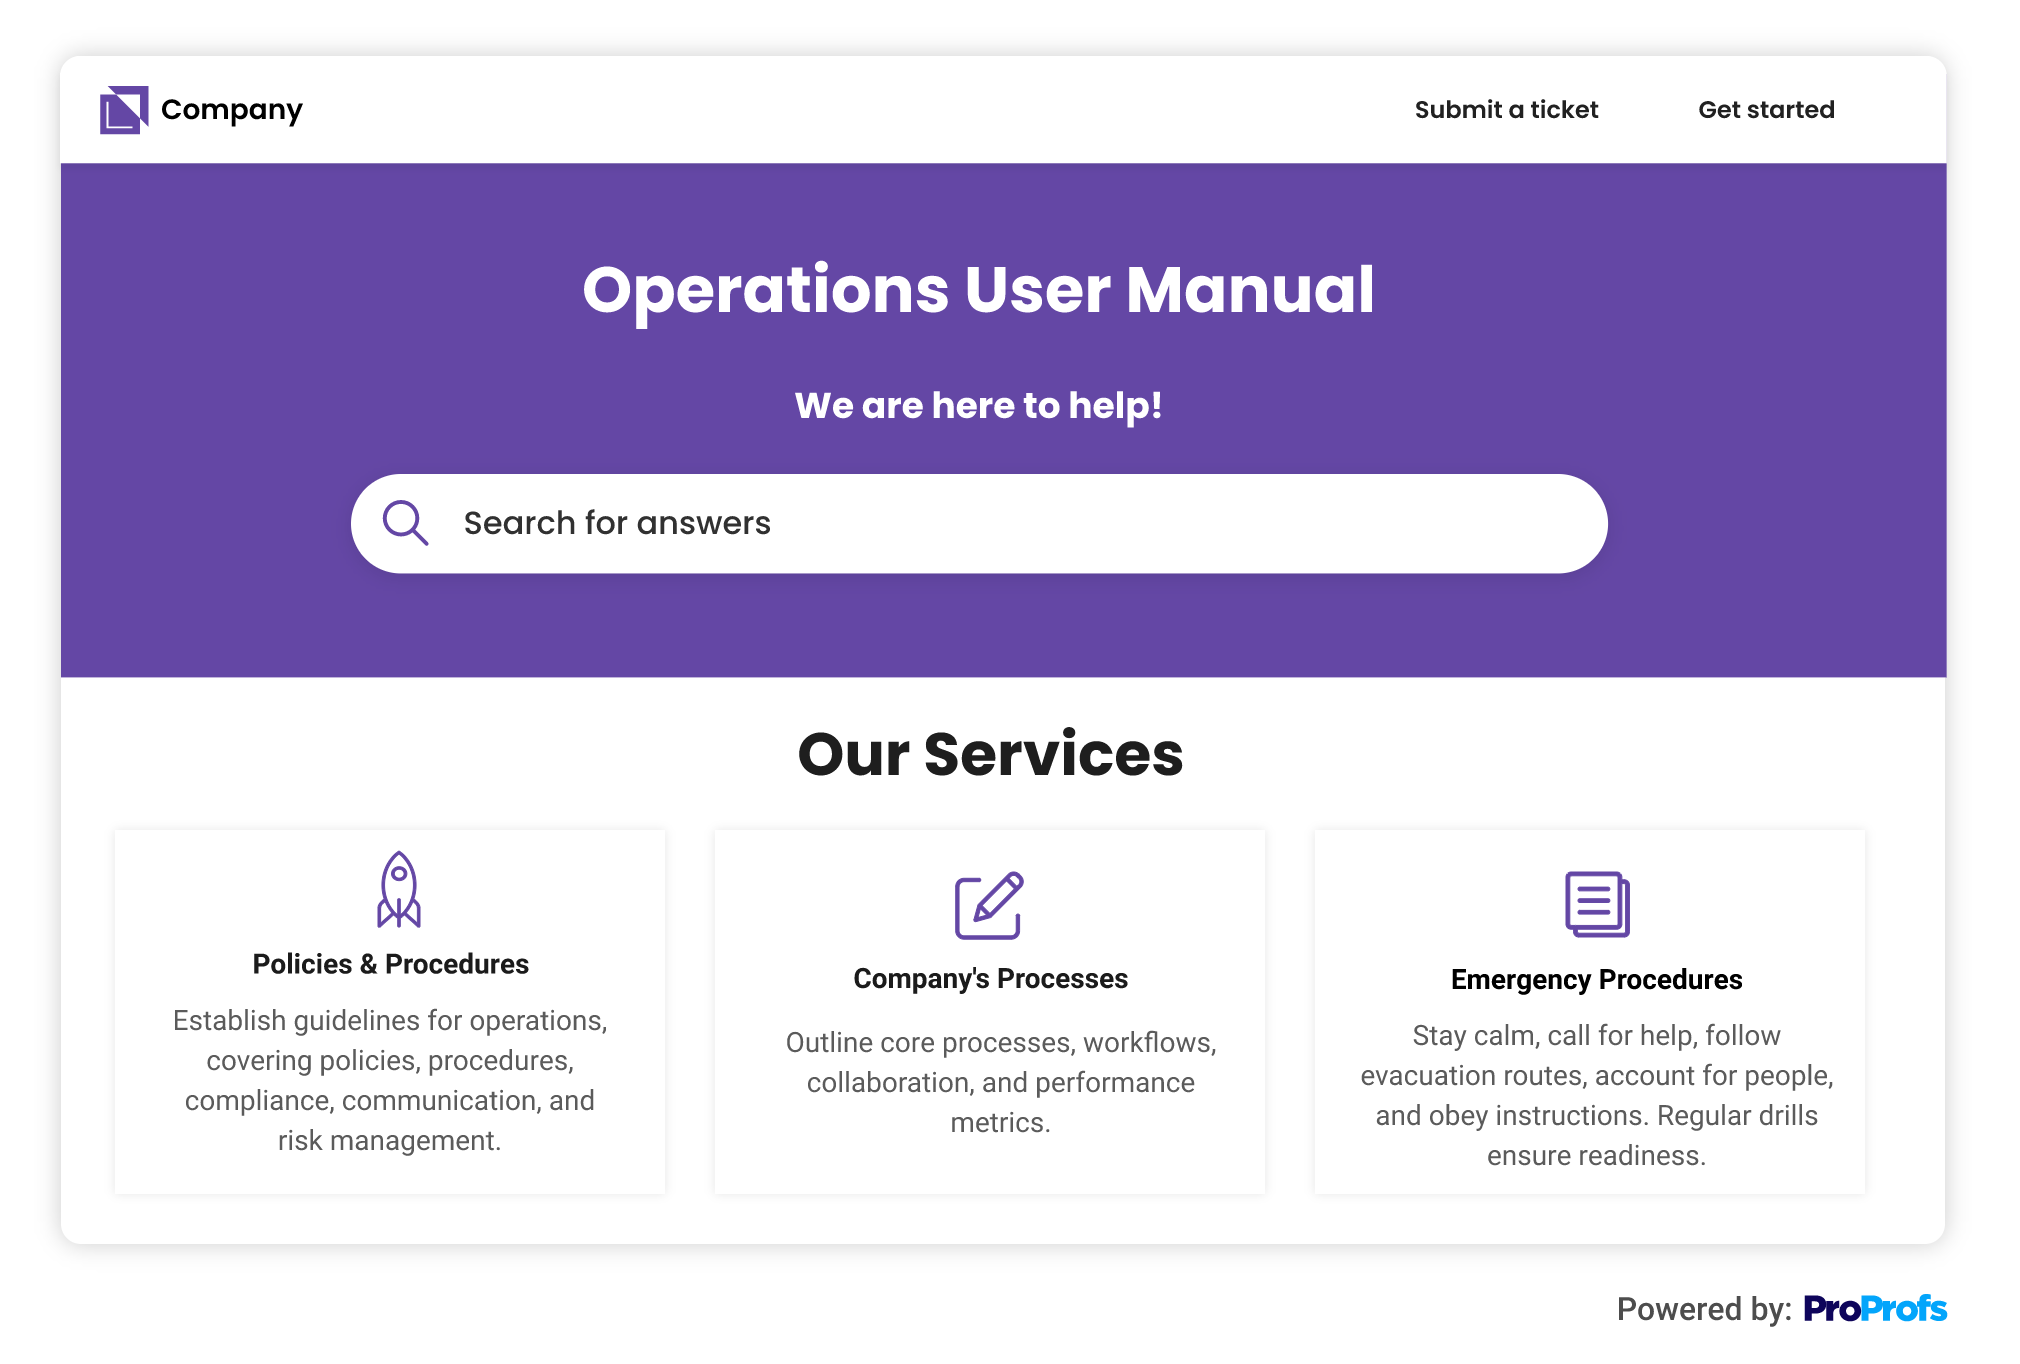 What Is a User Manual?